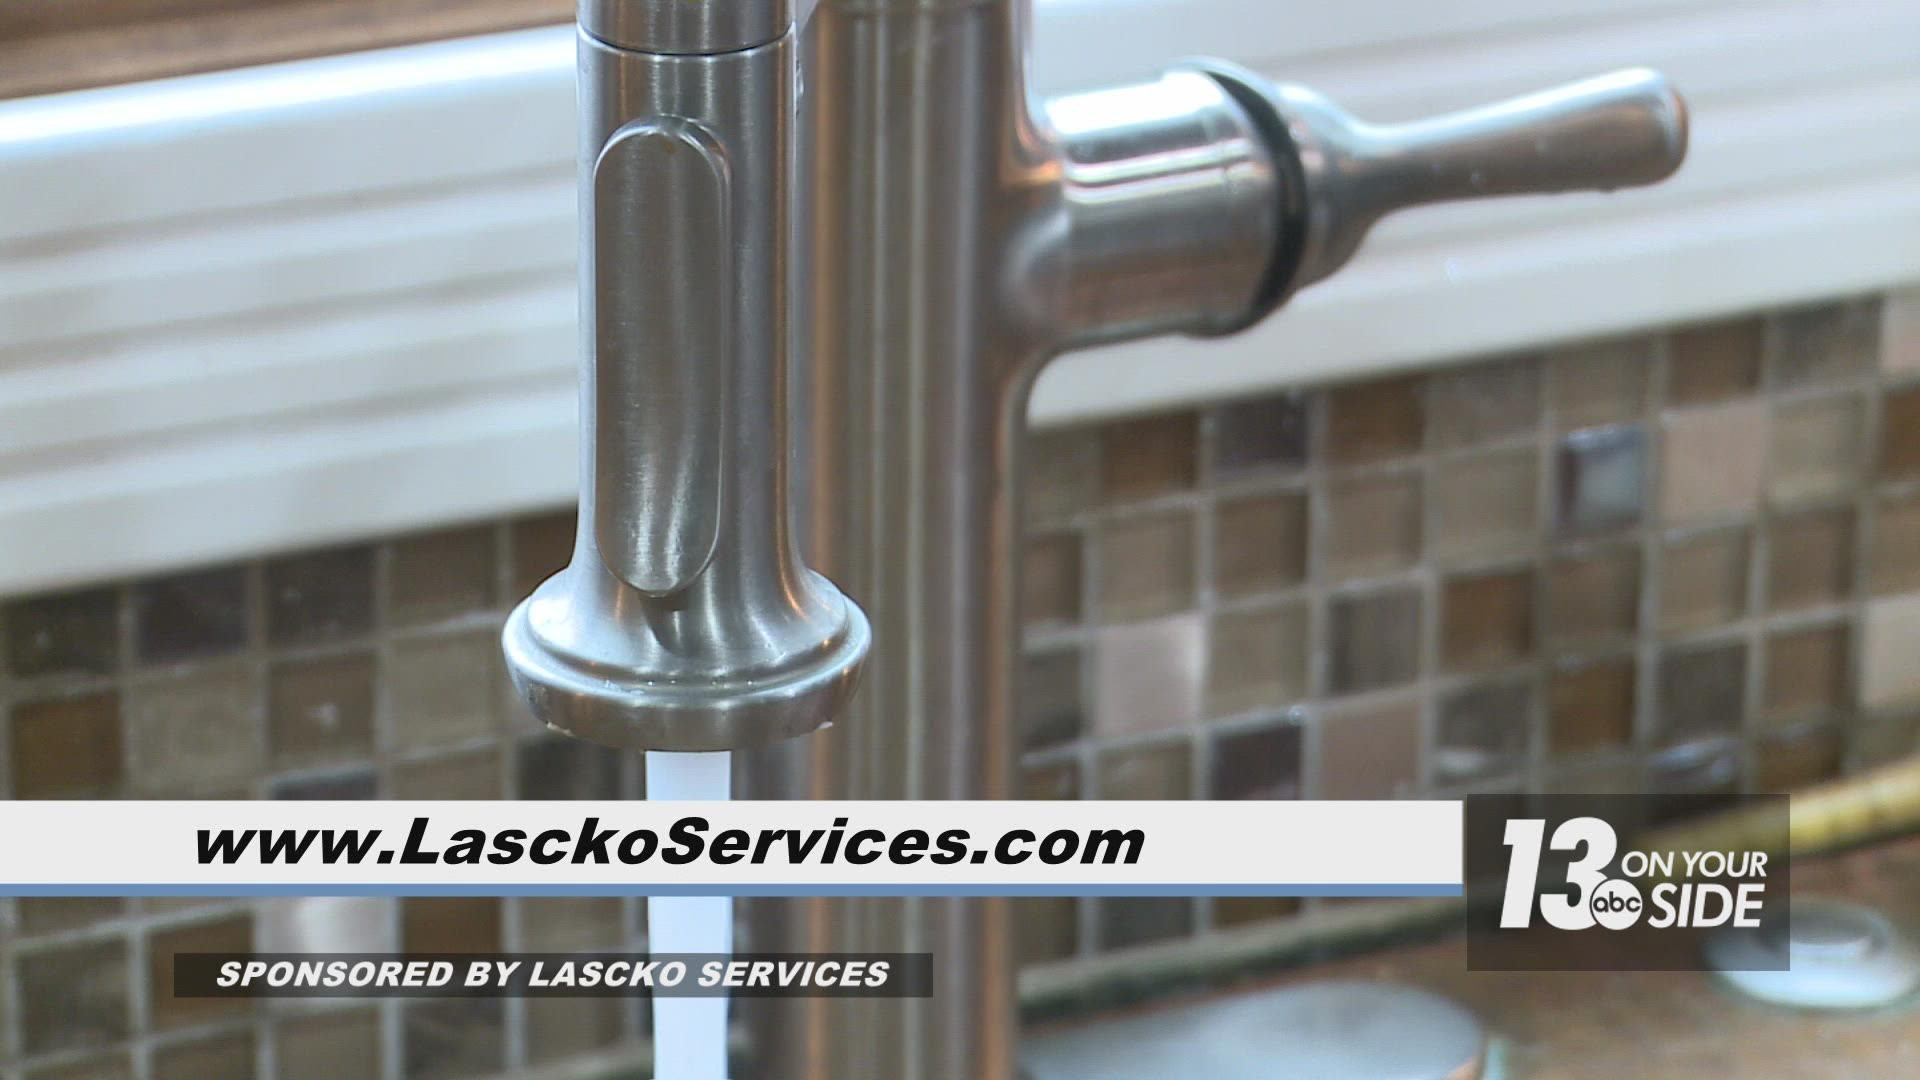 Lascko said his crews work with customers to find the system that works best for them.